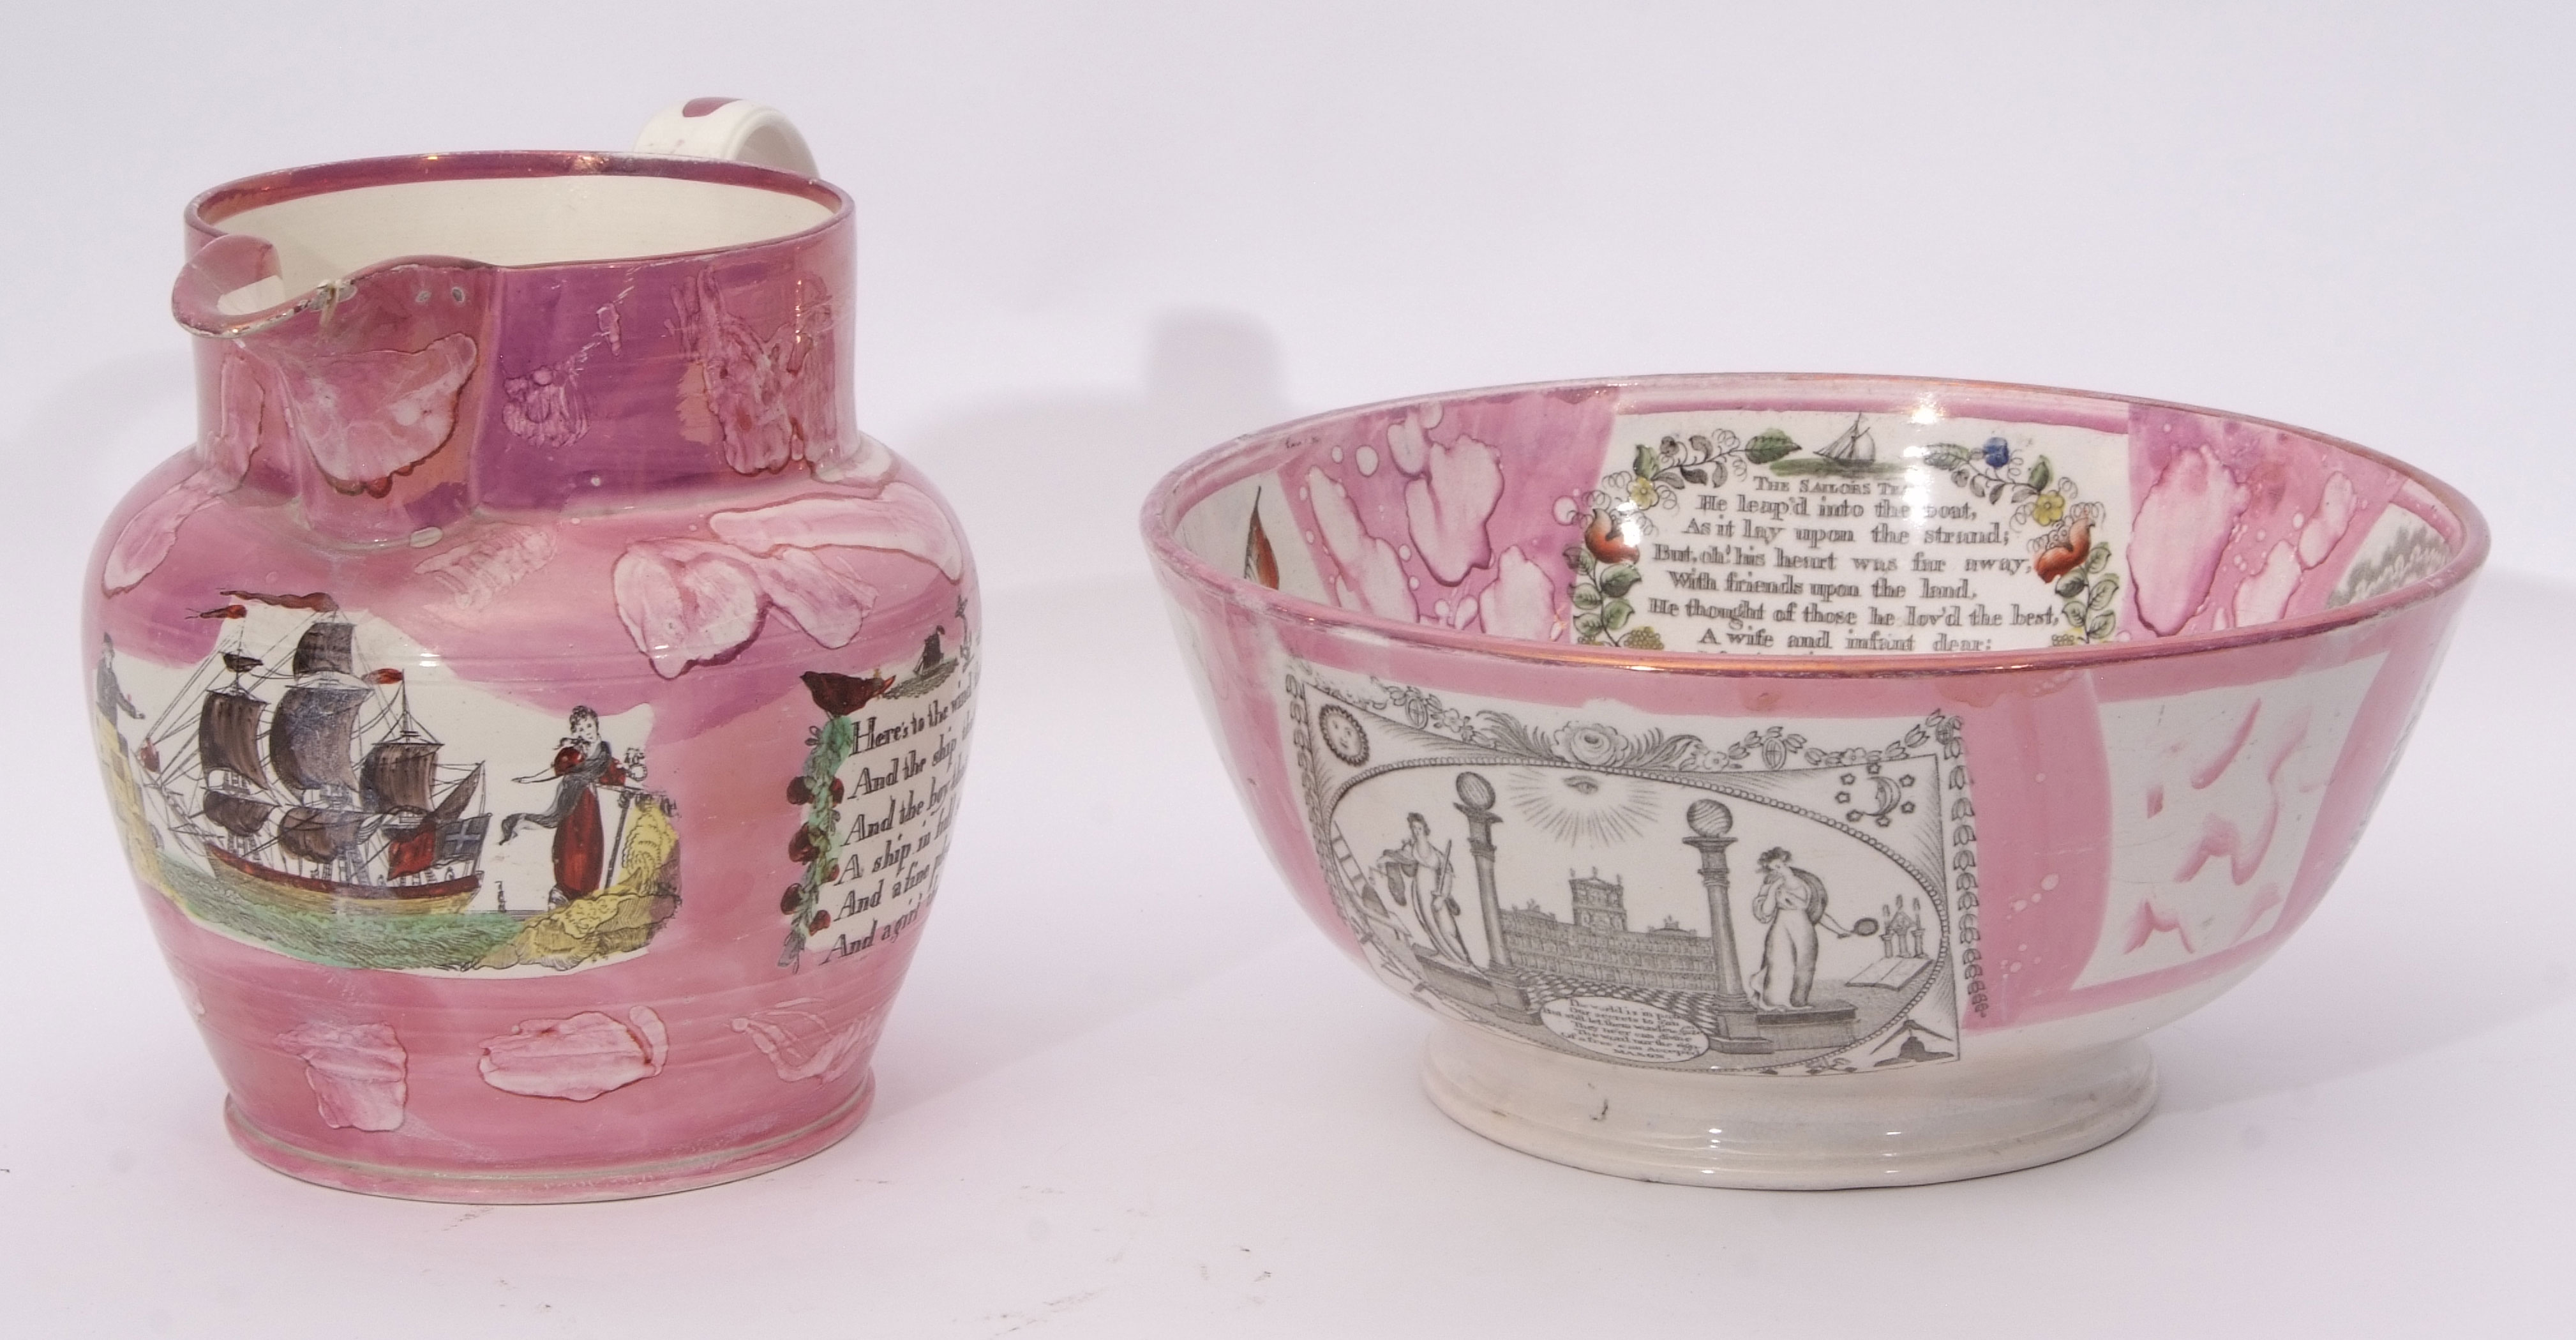 Sunderland lustre jug and a large bowl, both decorated with splash pink lustre, the jug decorated - Image 2 of 5